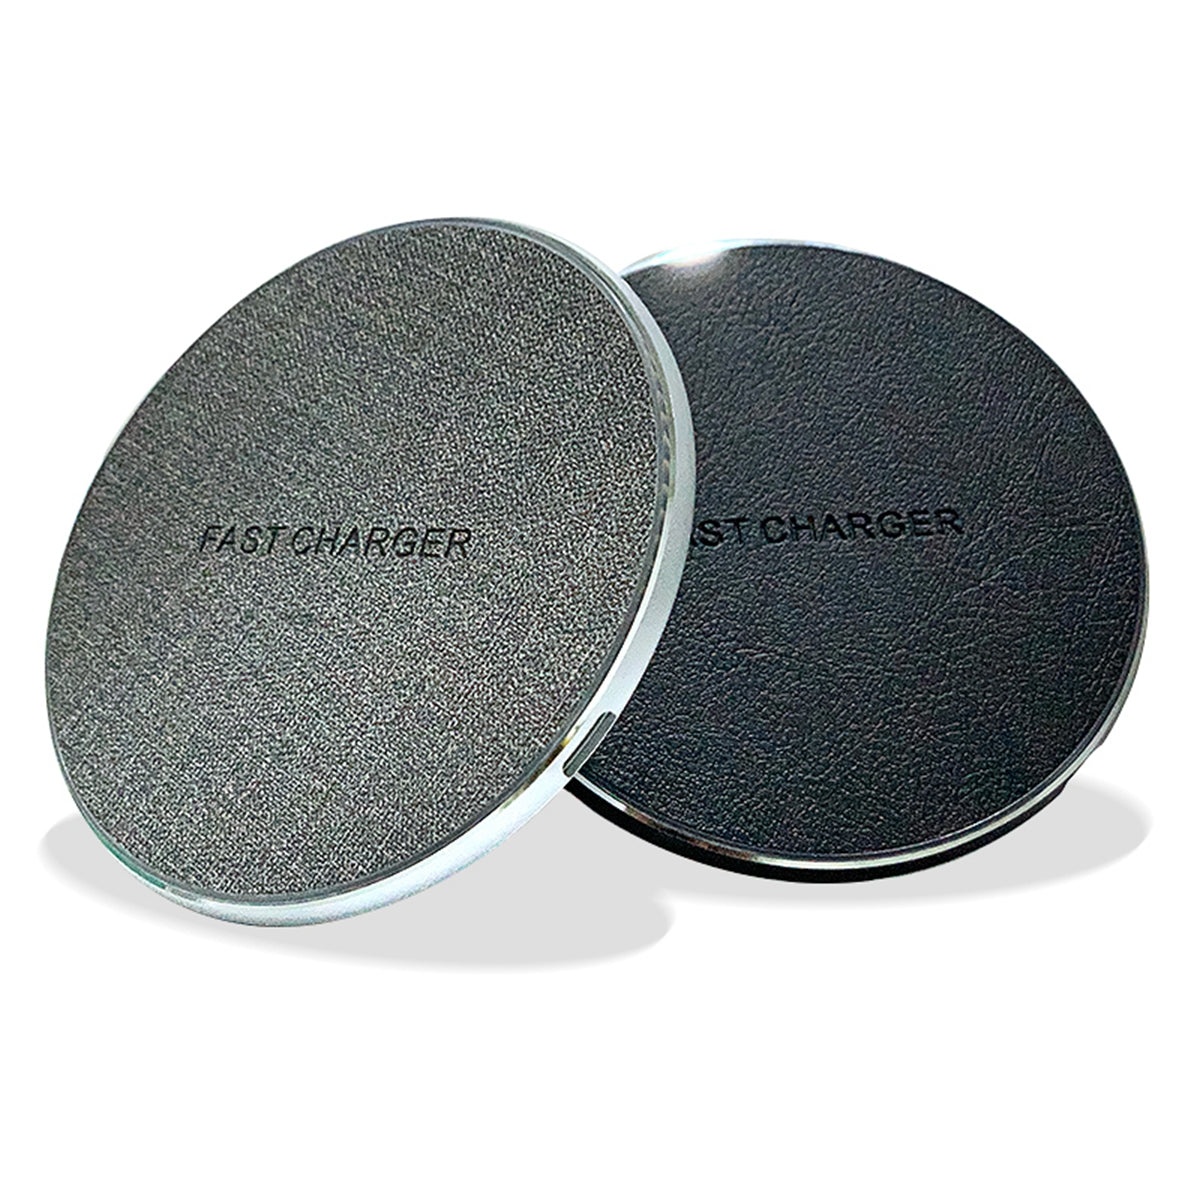 Bakeey Qi Wireless 15/20W Fast Quick Wireless Charger Charging Pad for Samsung Huawei